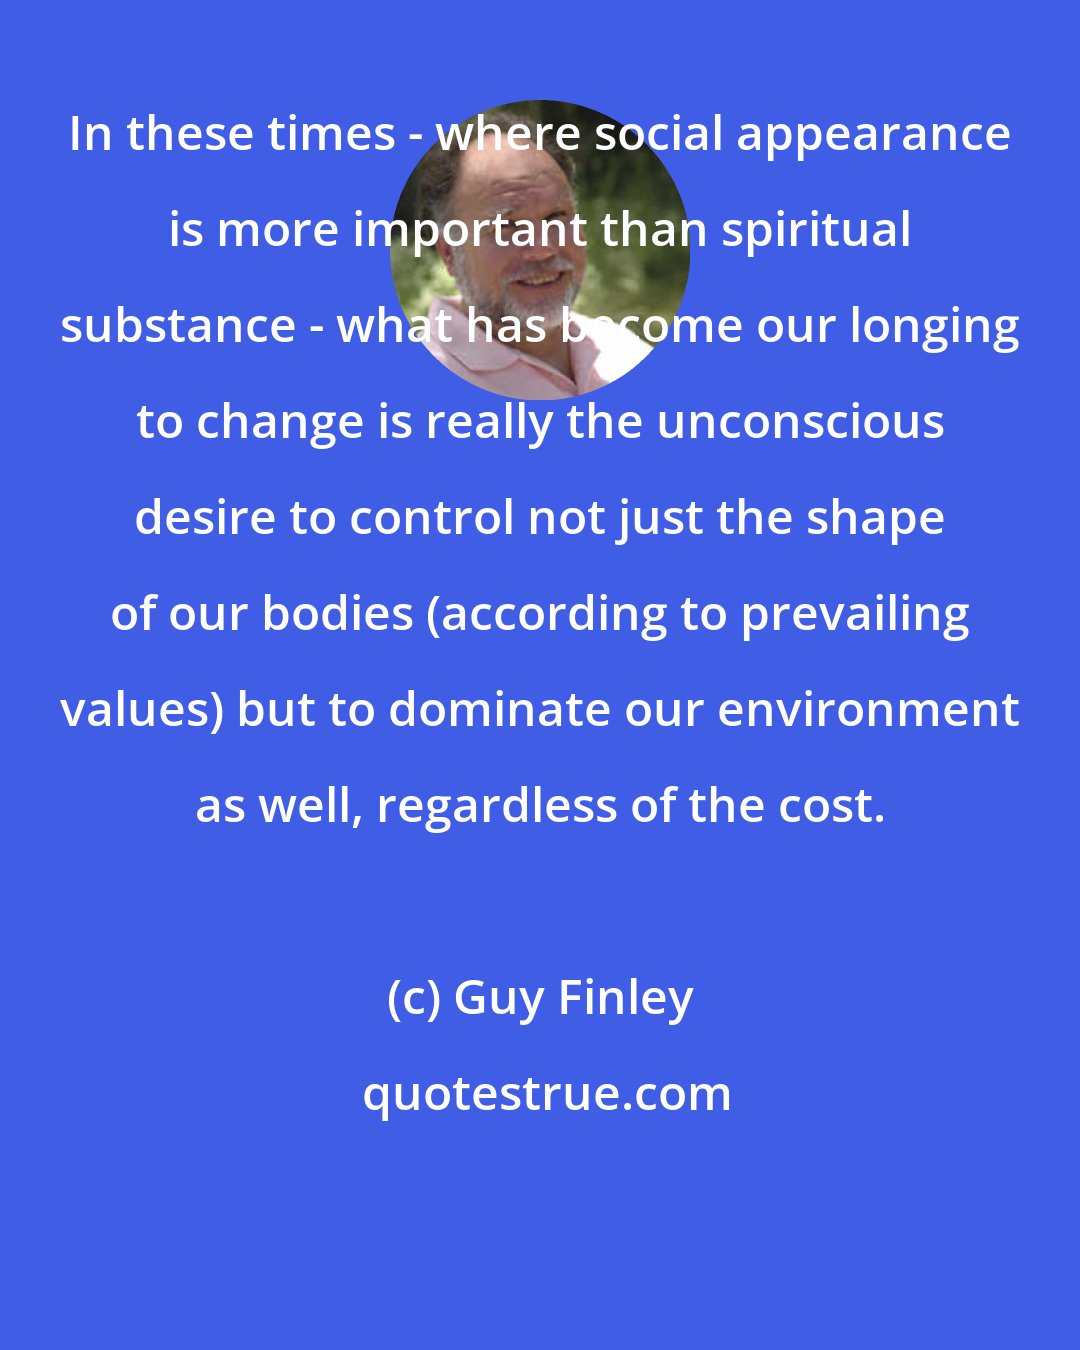 Guy Finley: In these times - where social appearance is more important than spiritual substance - what has become our longing to change is really the unconscious desire to control not just the shape of our bodies (according to prevailing values) but to dominate our environment as well, regardless of the cost.